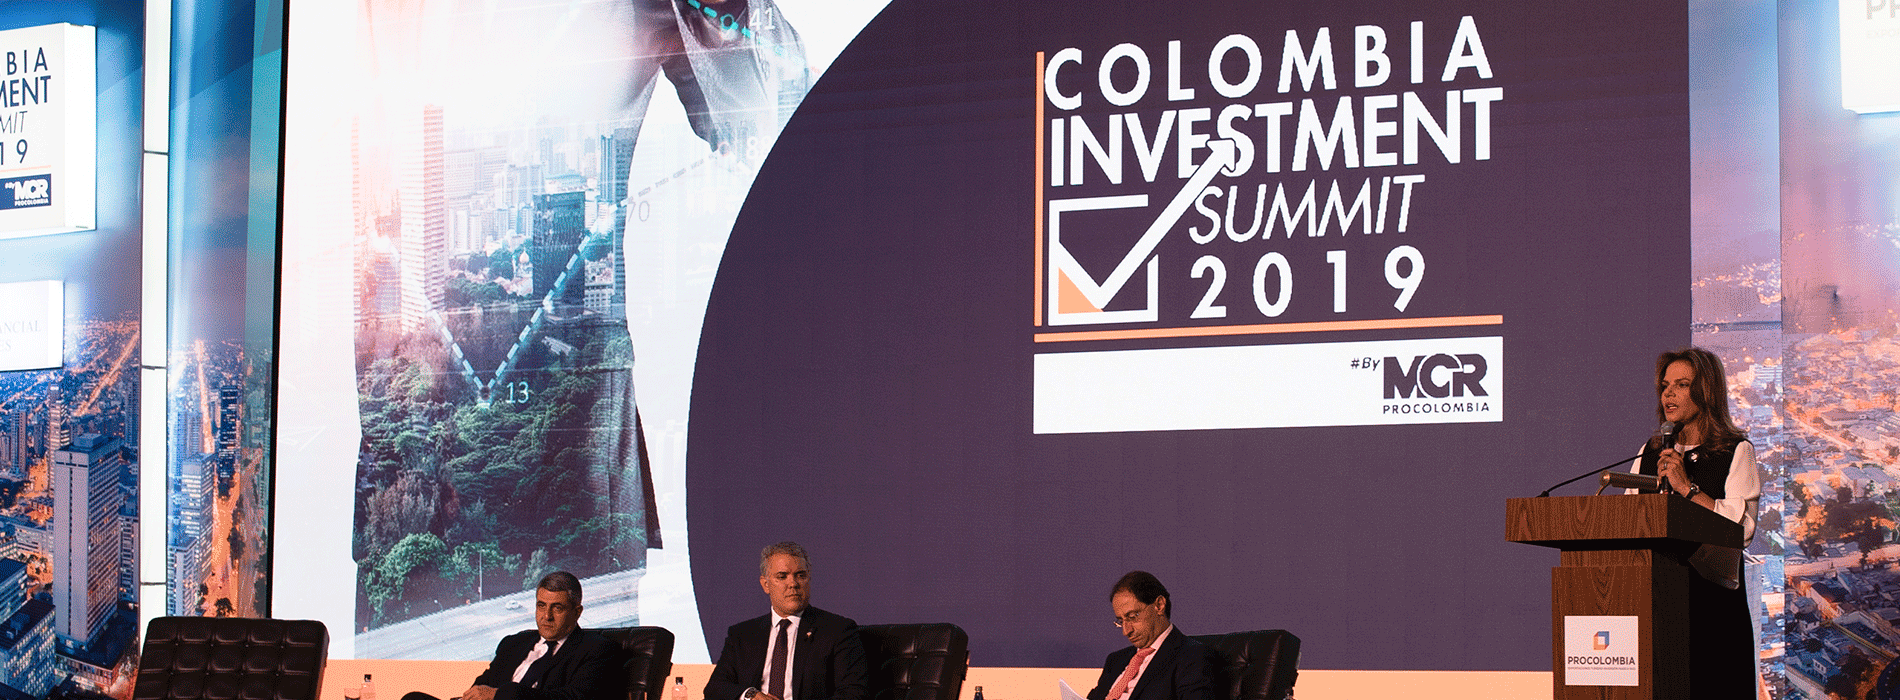 Over 550 investors from around the world will meet at the Colombia investment summit